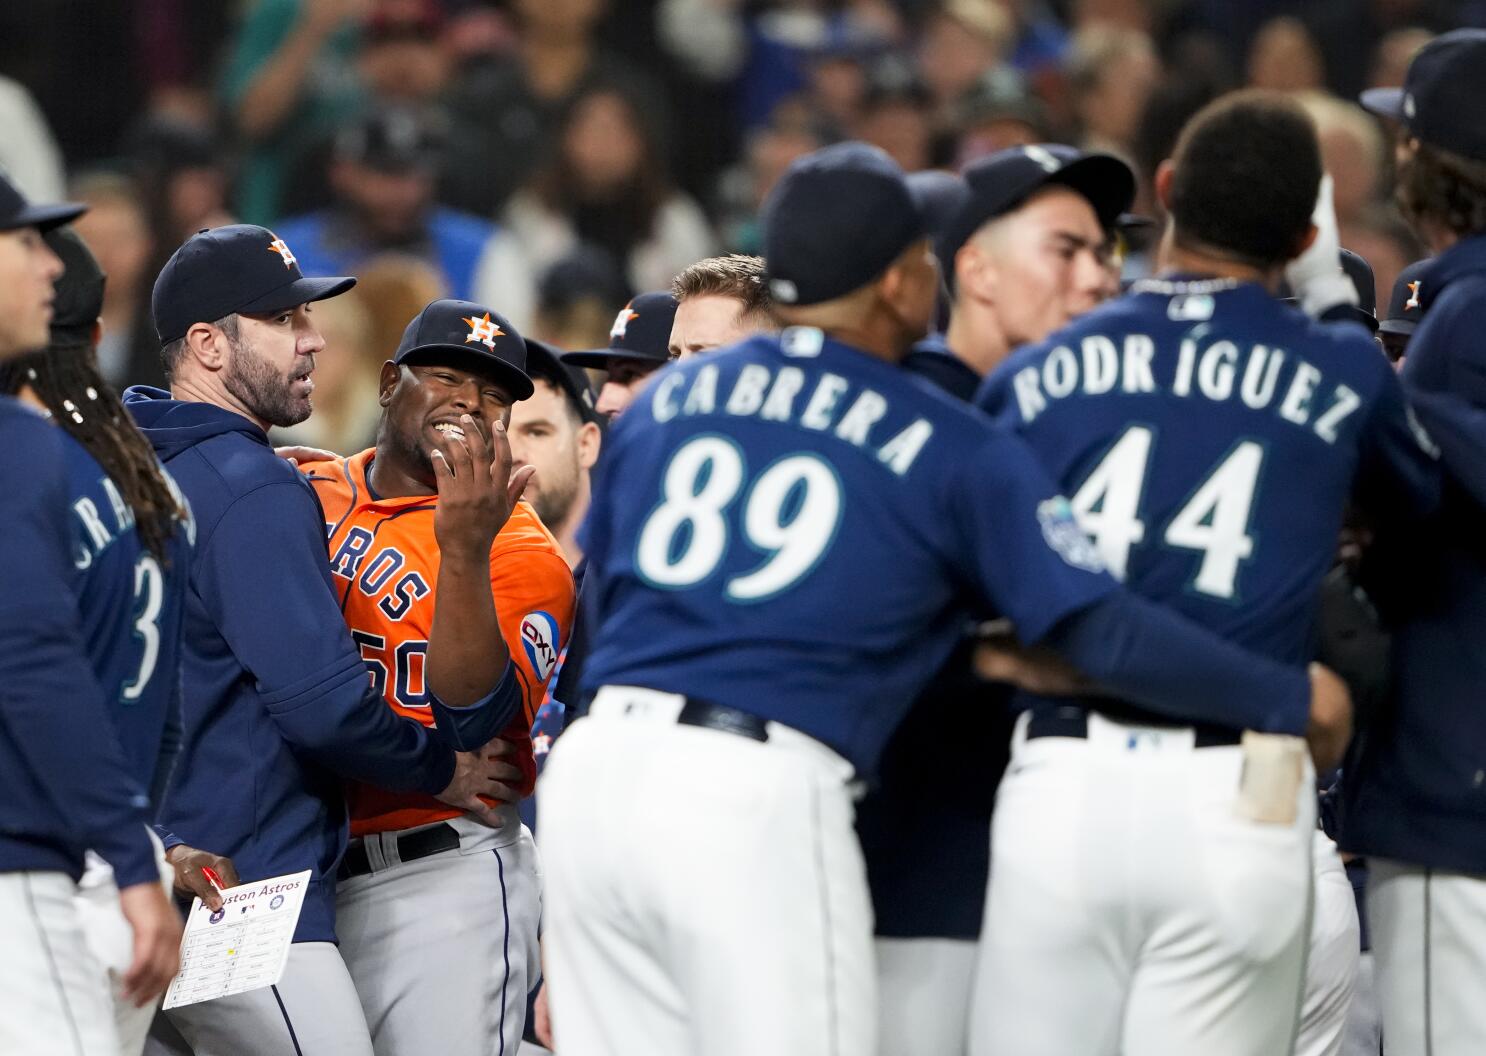 Seattle Mariners end playoff run after 1-0 loss to Astros in Game